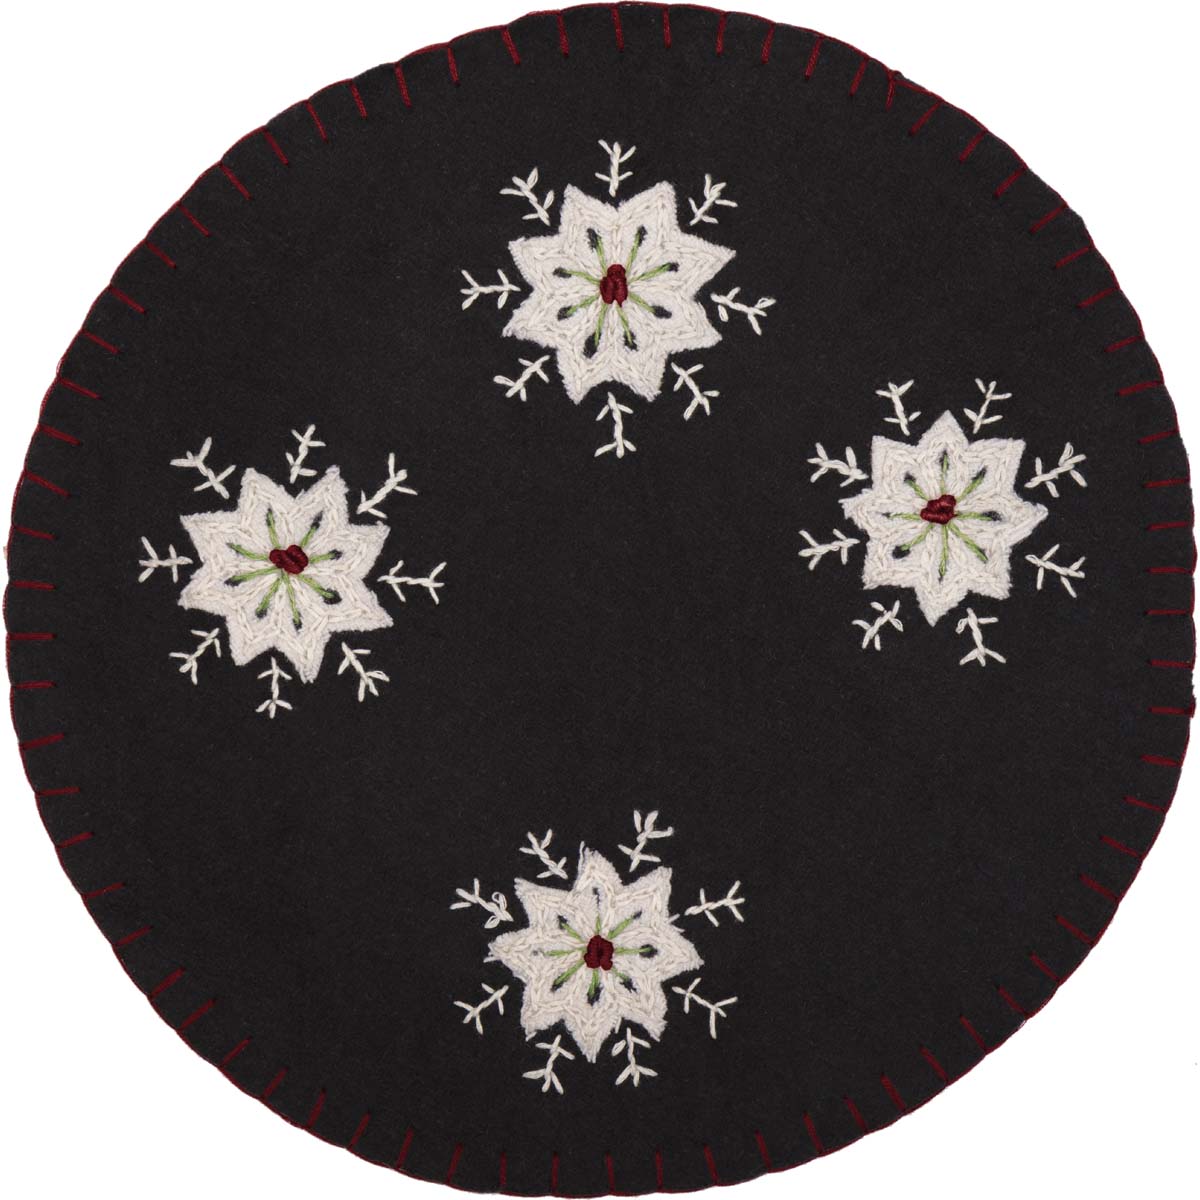 Christmas Snowflake Tablemat Felt Embroidered 13 Set of 6 VHC Brands